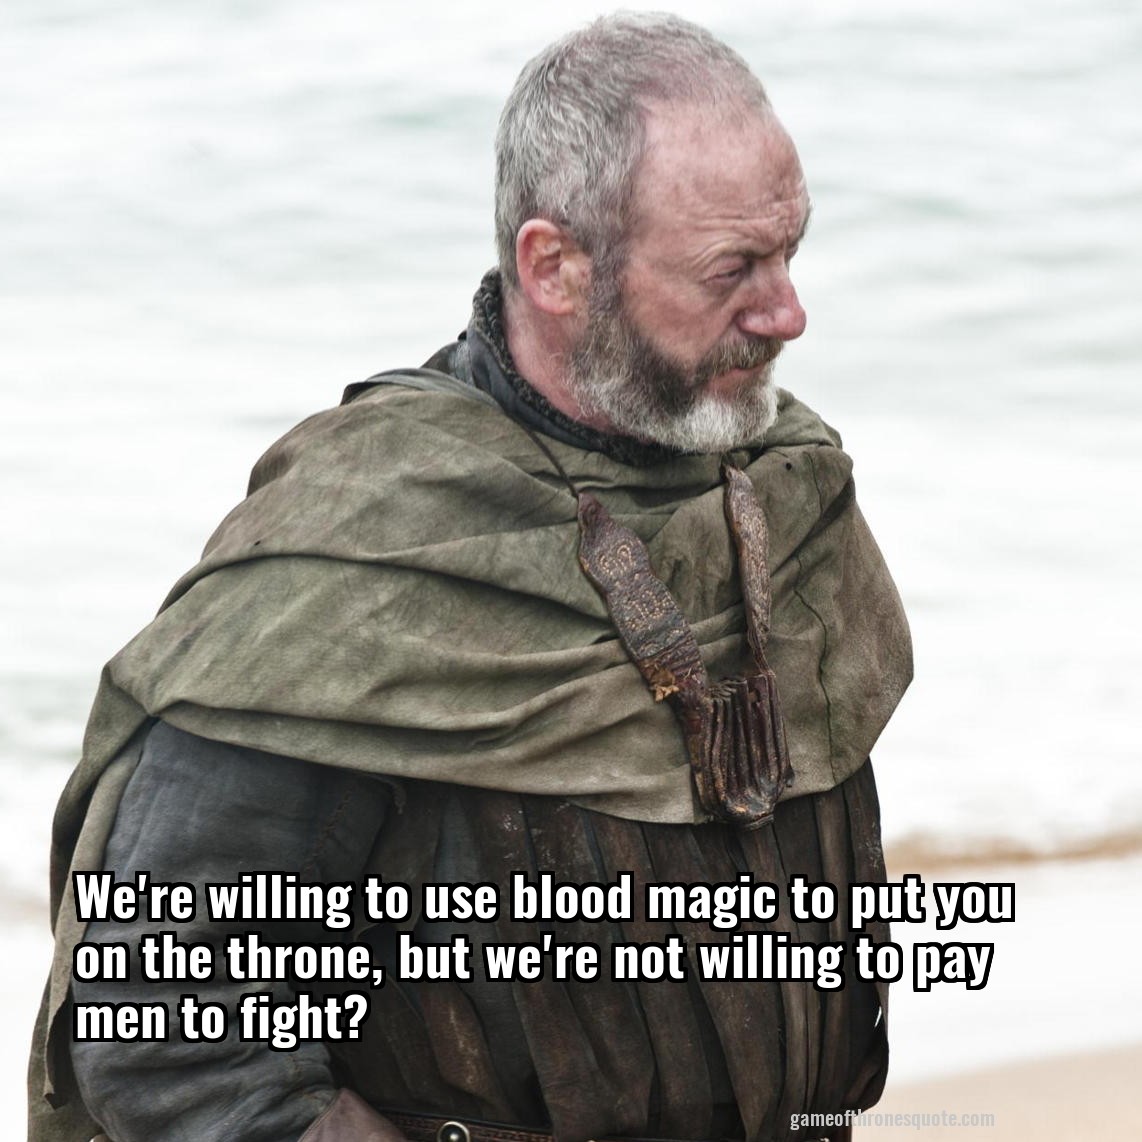 We're willing to use blood magic to put you on the throne, but we're not willing to pay men to fight?